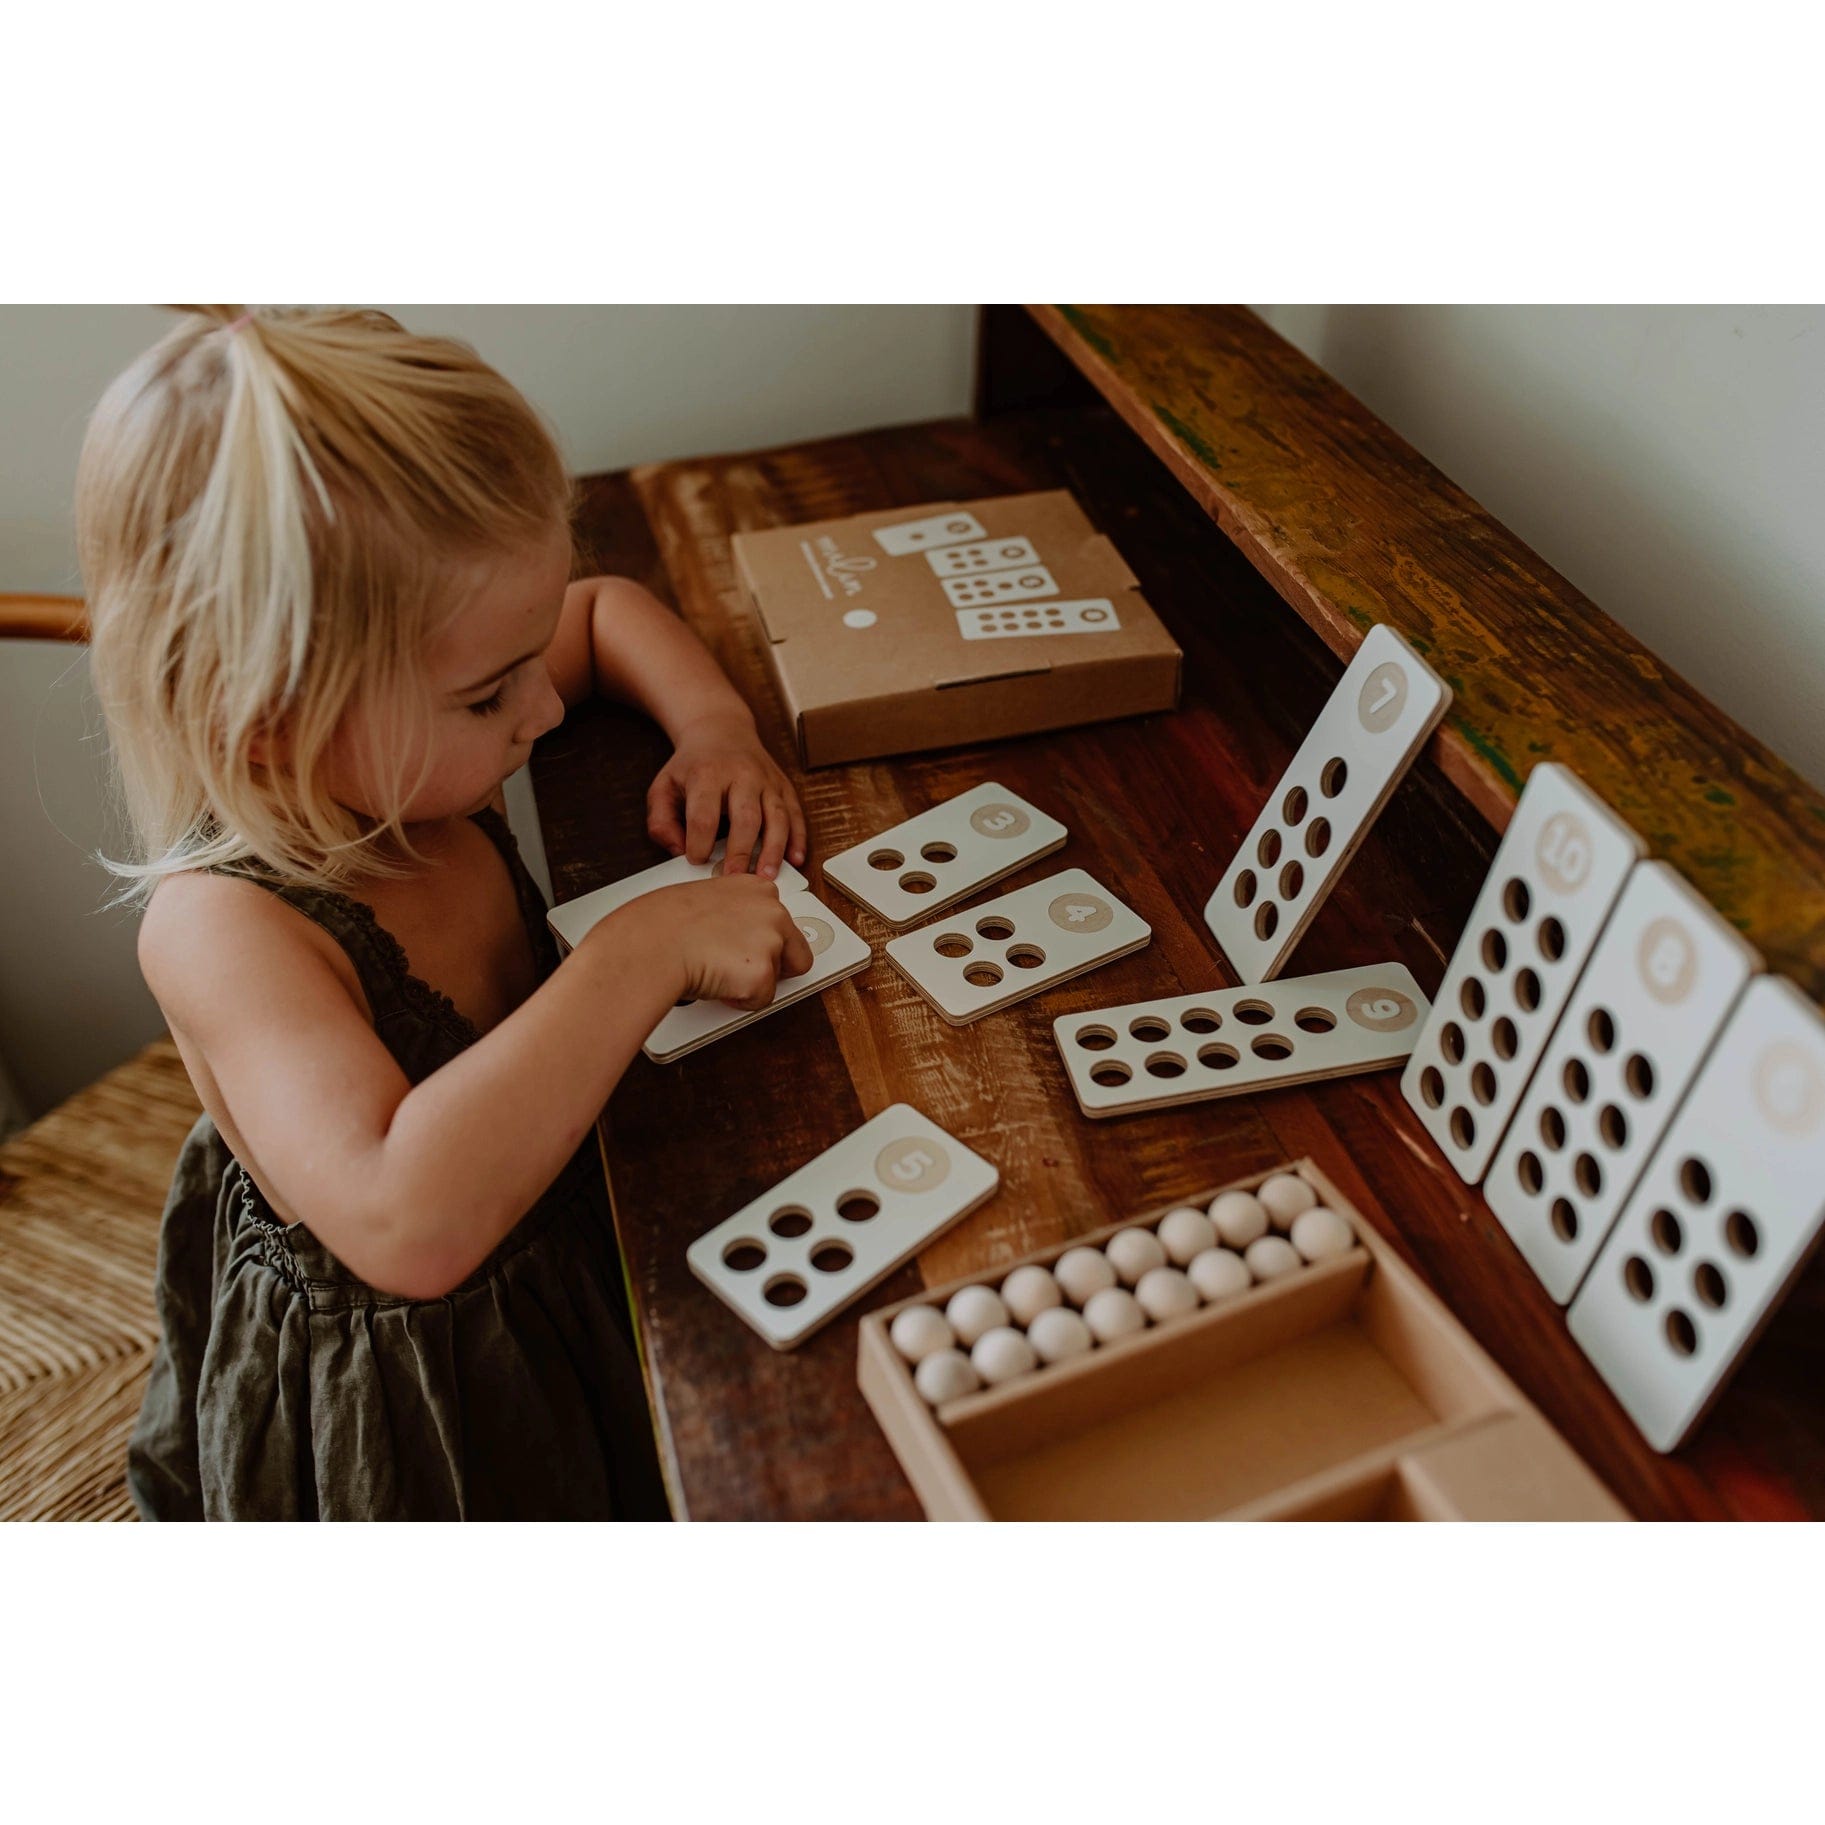 Wooden Counting Blocks Milin Lil Tulips